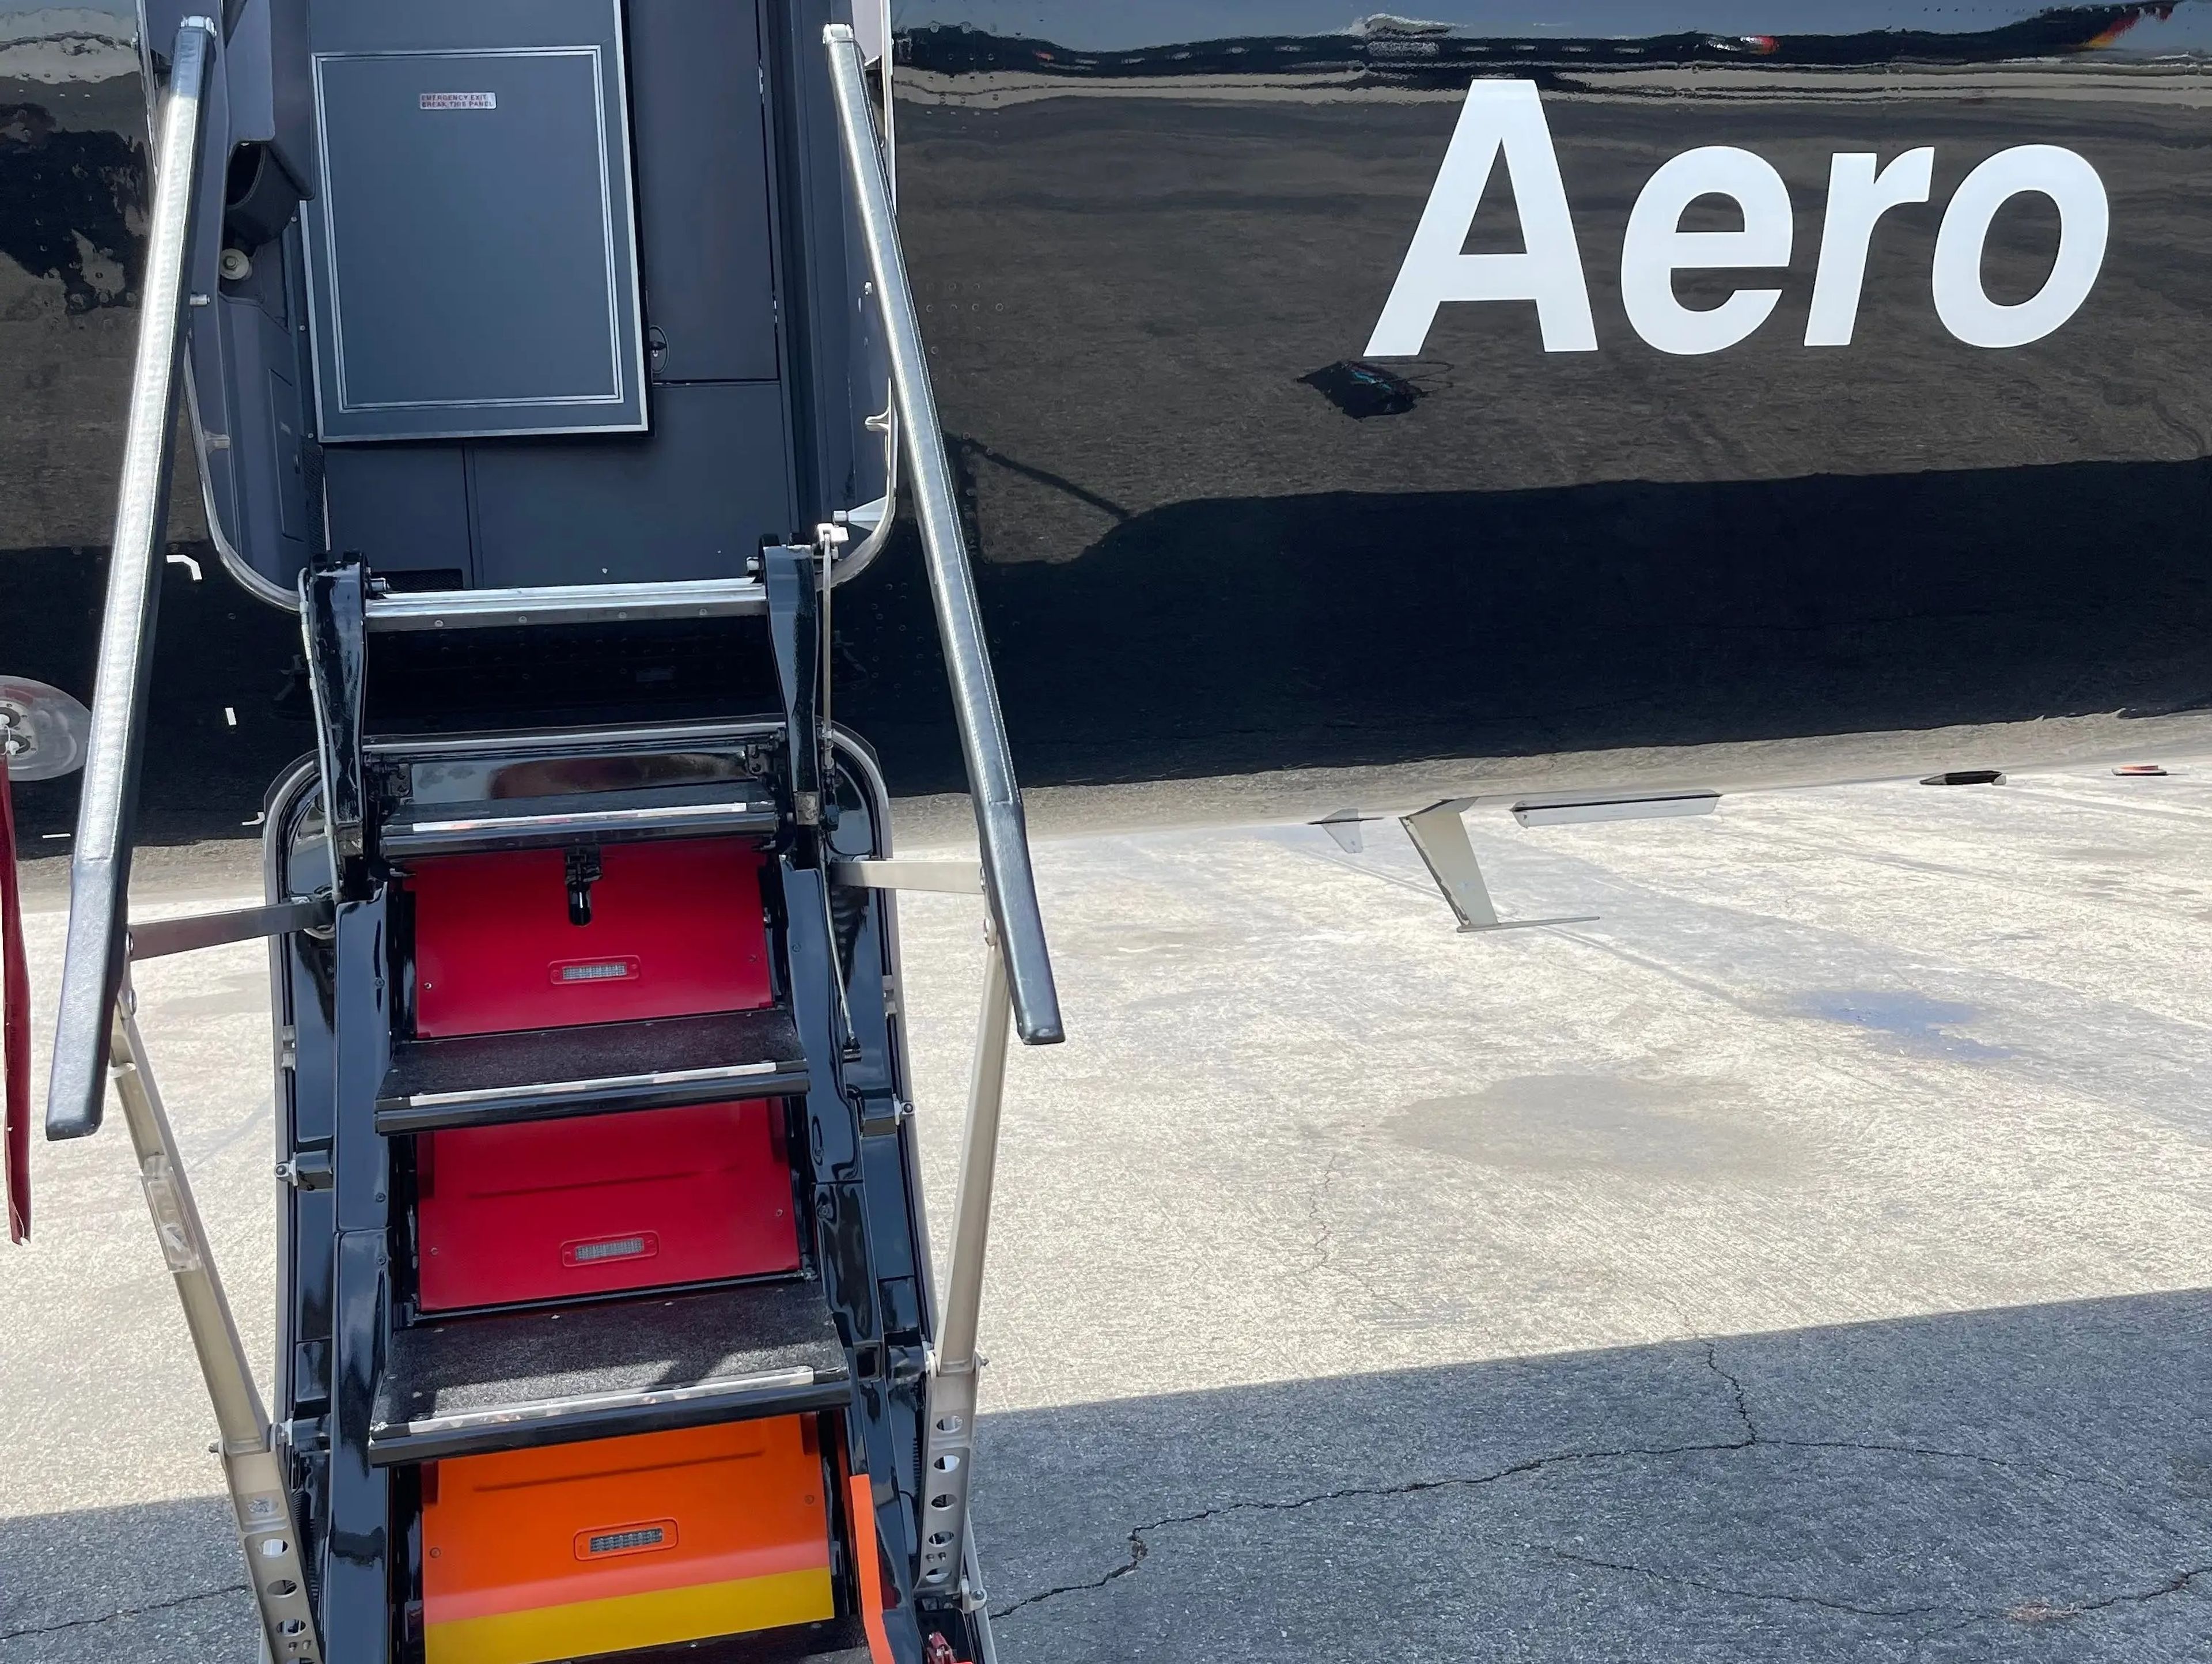 Aero’s signature black jets and colorful stairs are just a prelude to what’s waiting inside.